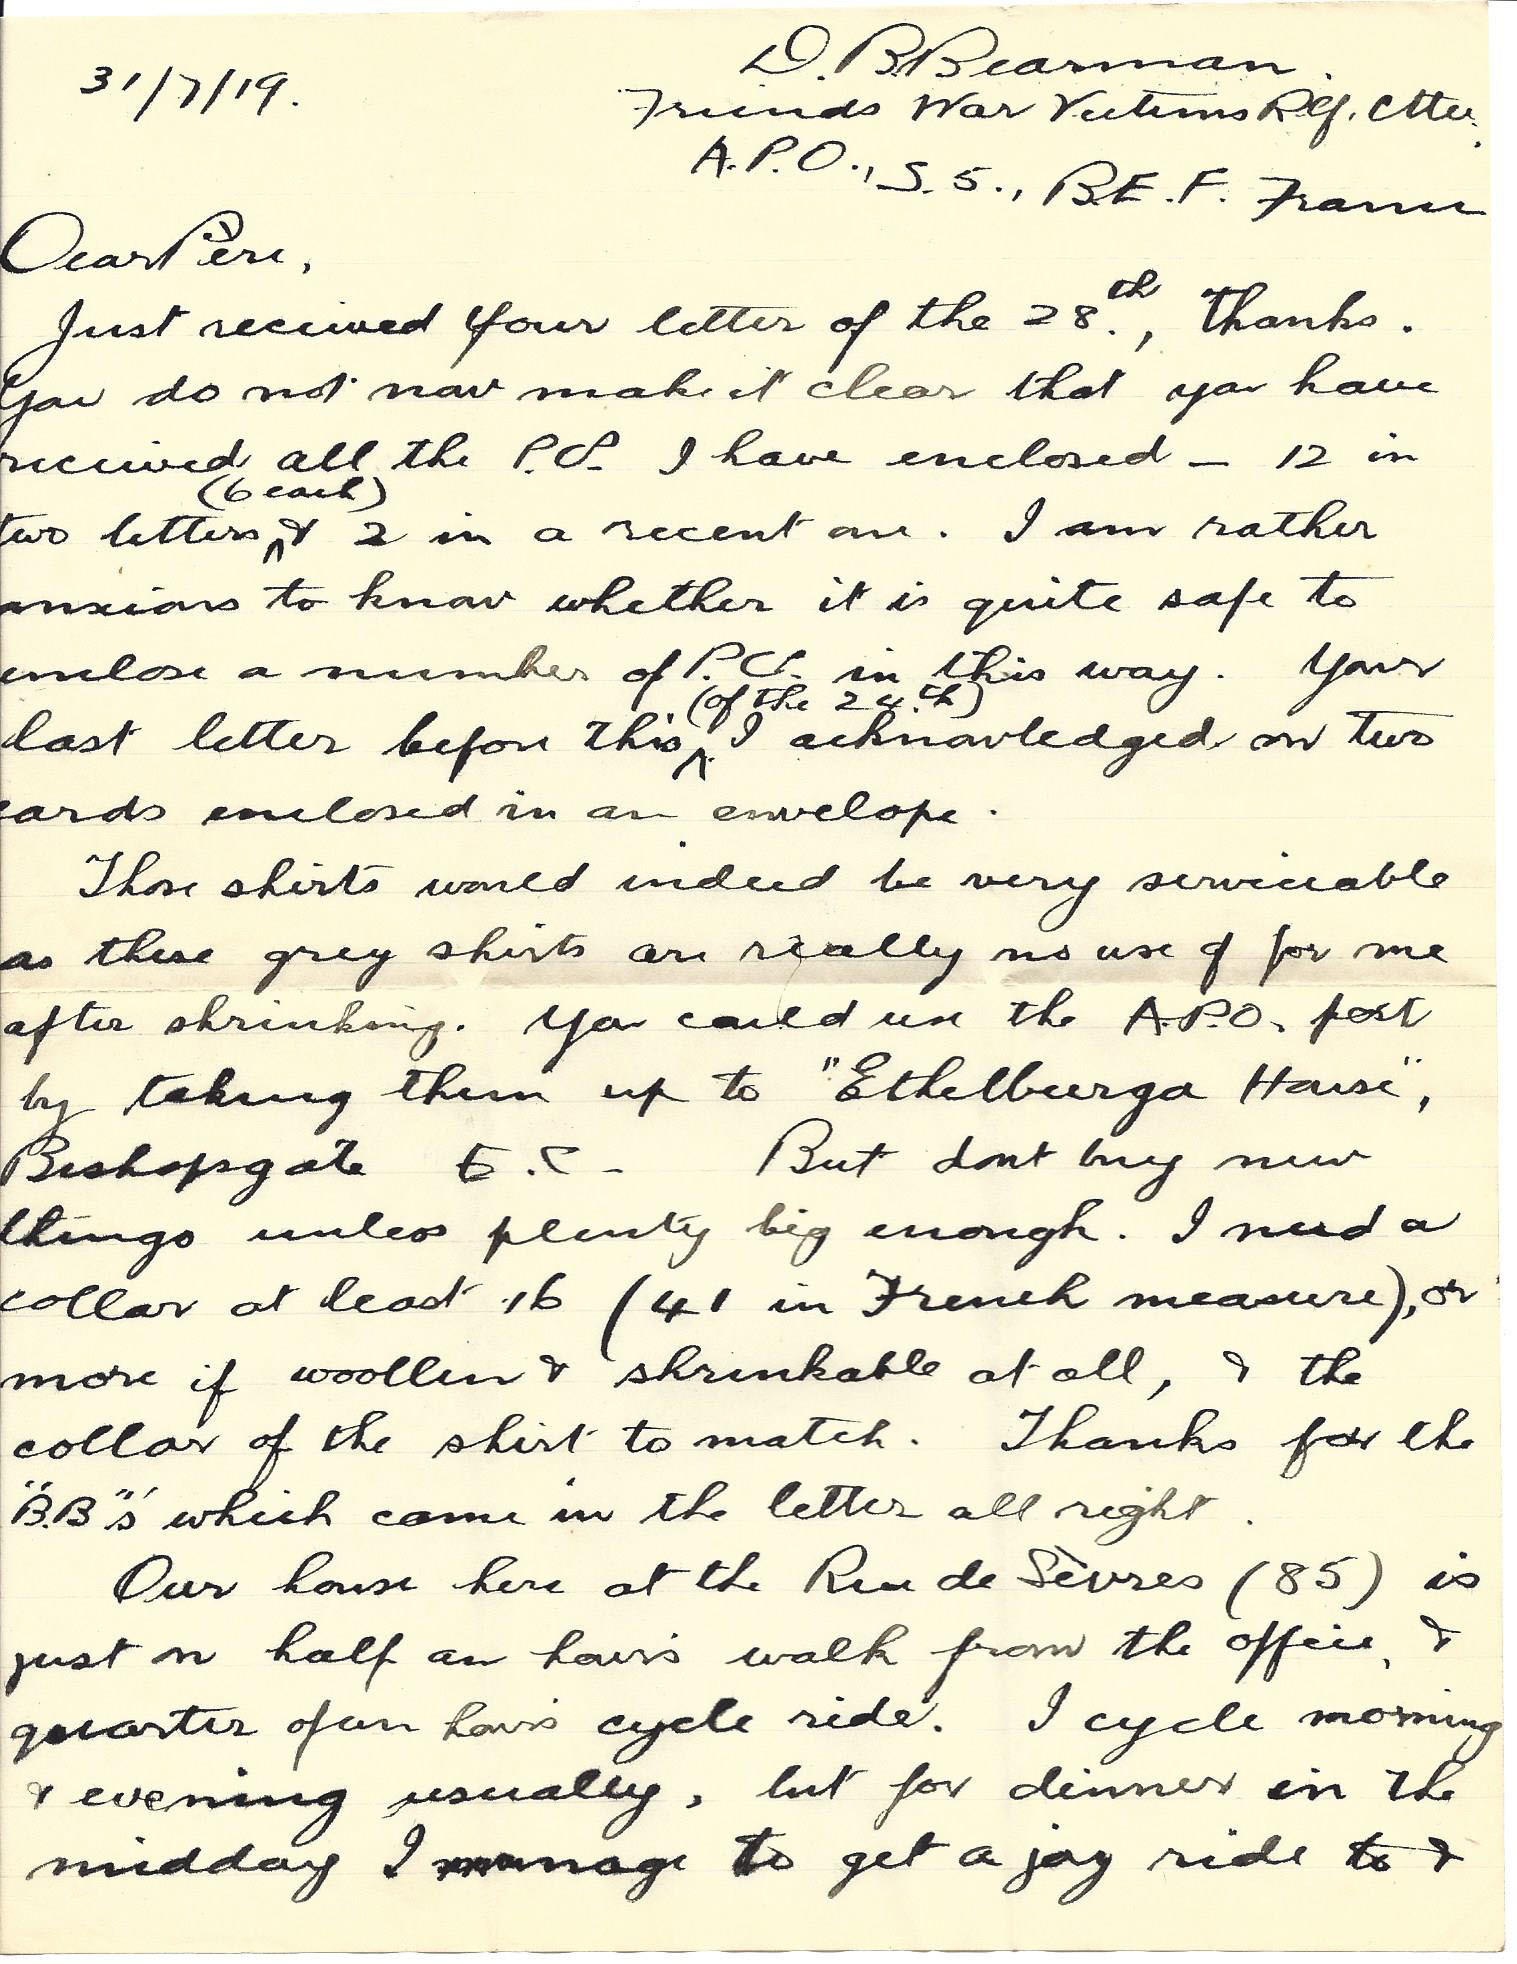 1919-07-31 Letter by Donald Boyd Bearman to his father, page 1